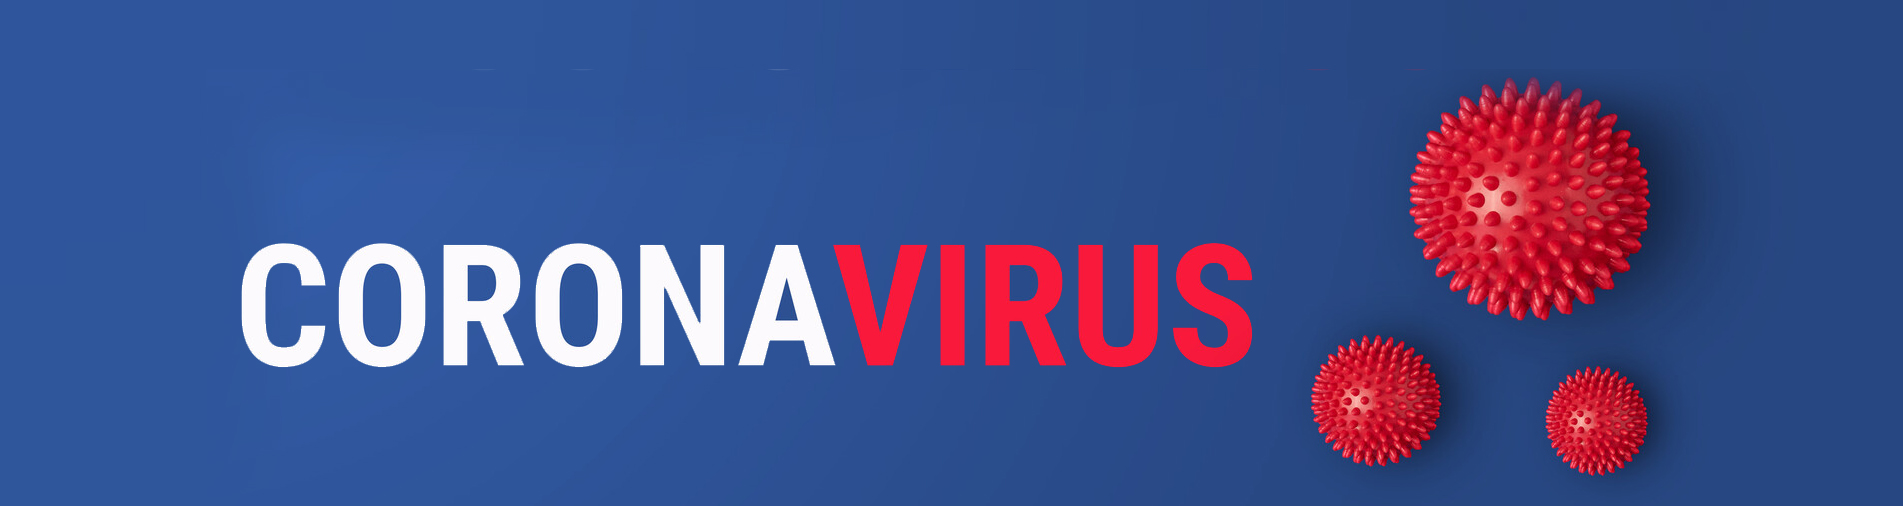 Why Coronavirus Could Change Your SEO Perspective